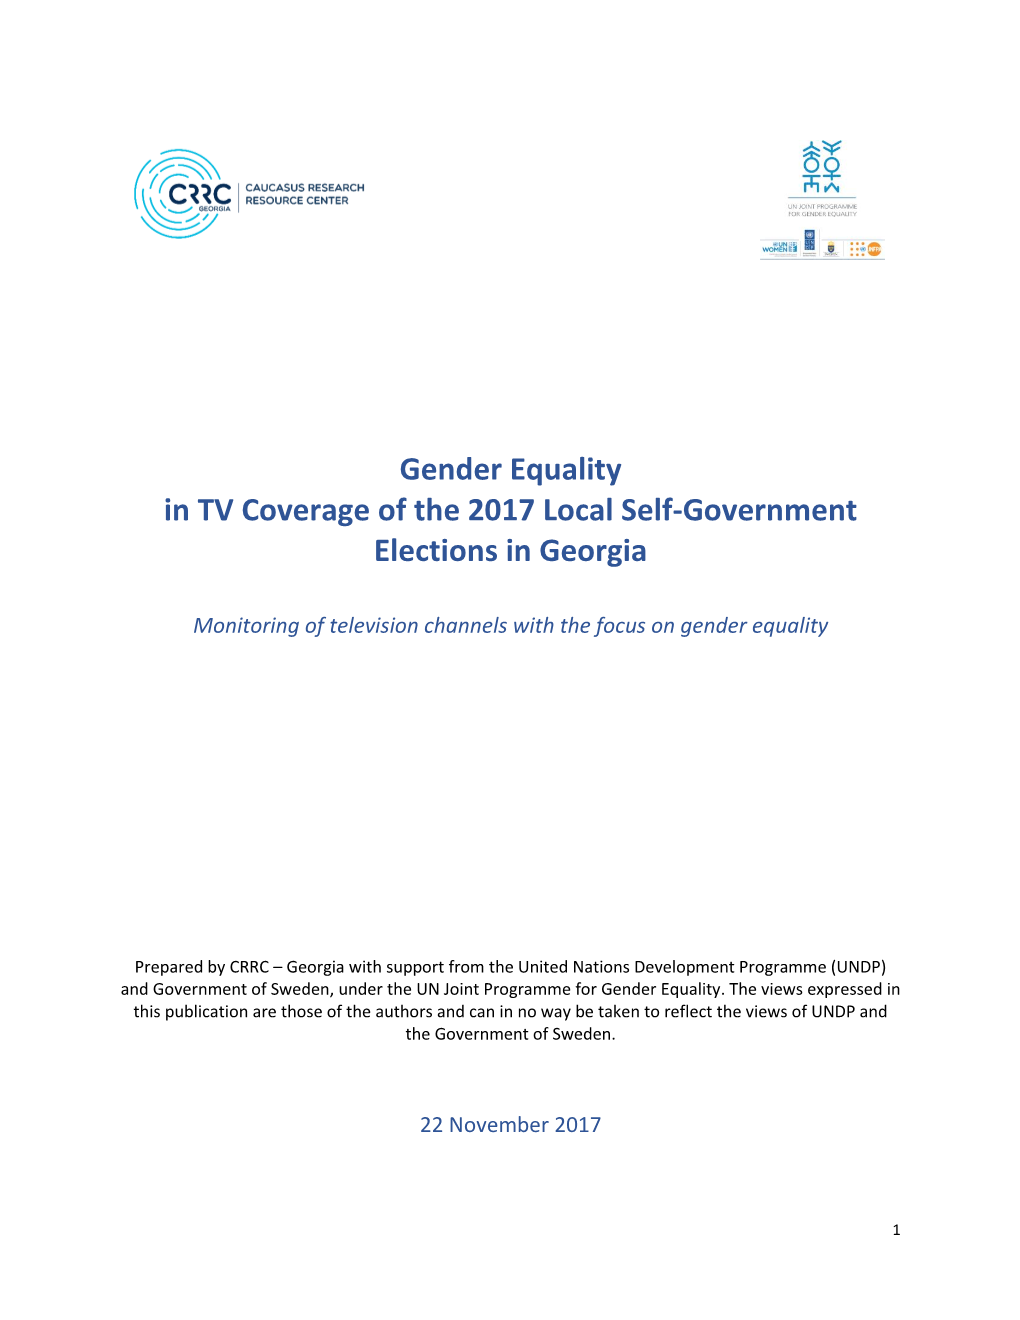 Gender Equality in TV Coverage of the 2017 Local Self-Government Elections in Georgia